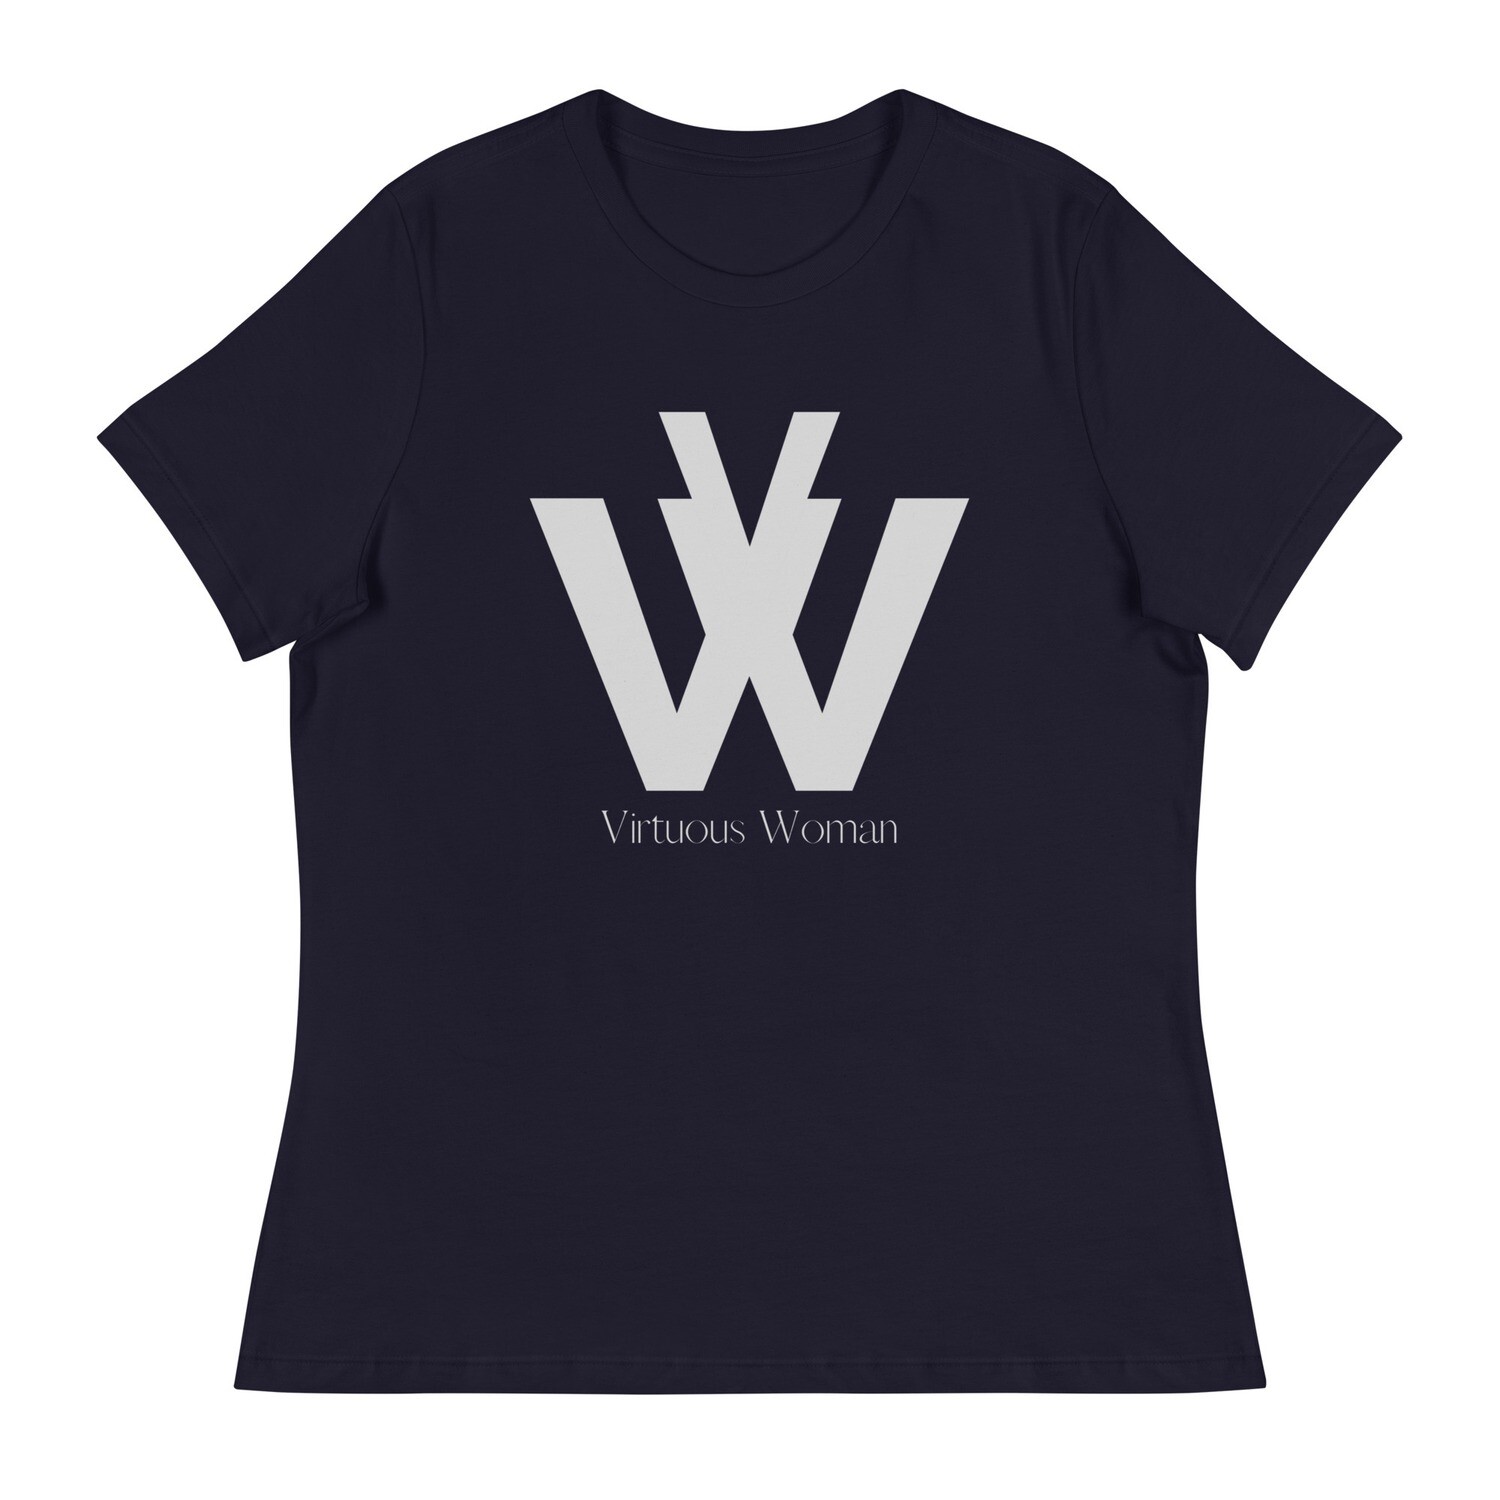 VW - Virtuous Woman - Women's Relaxed T-Shirt